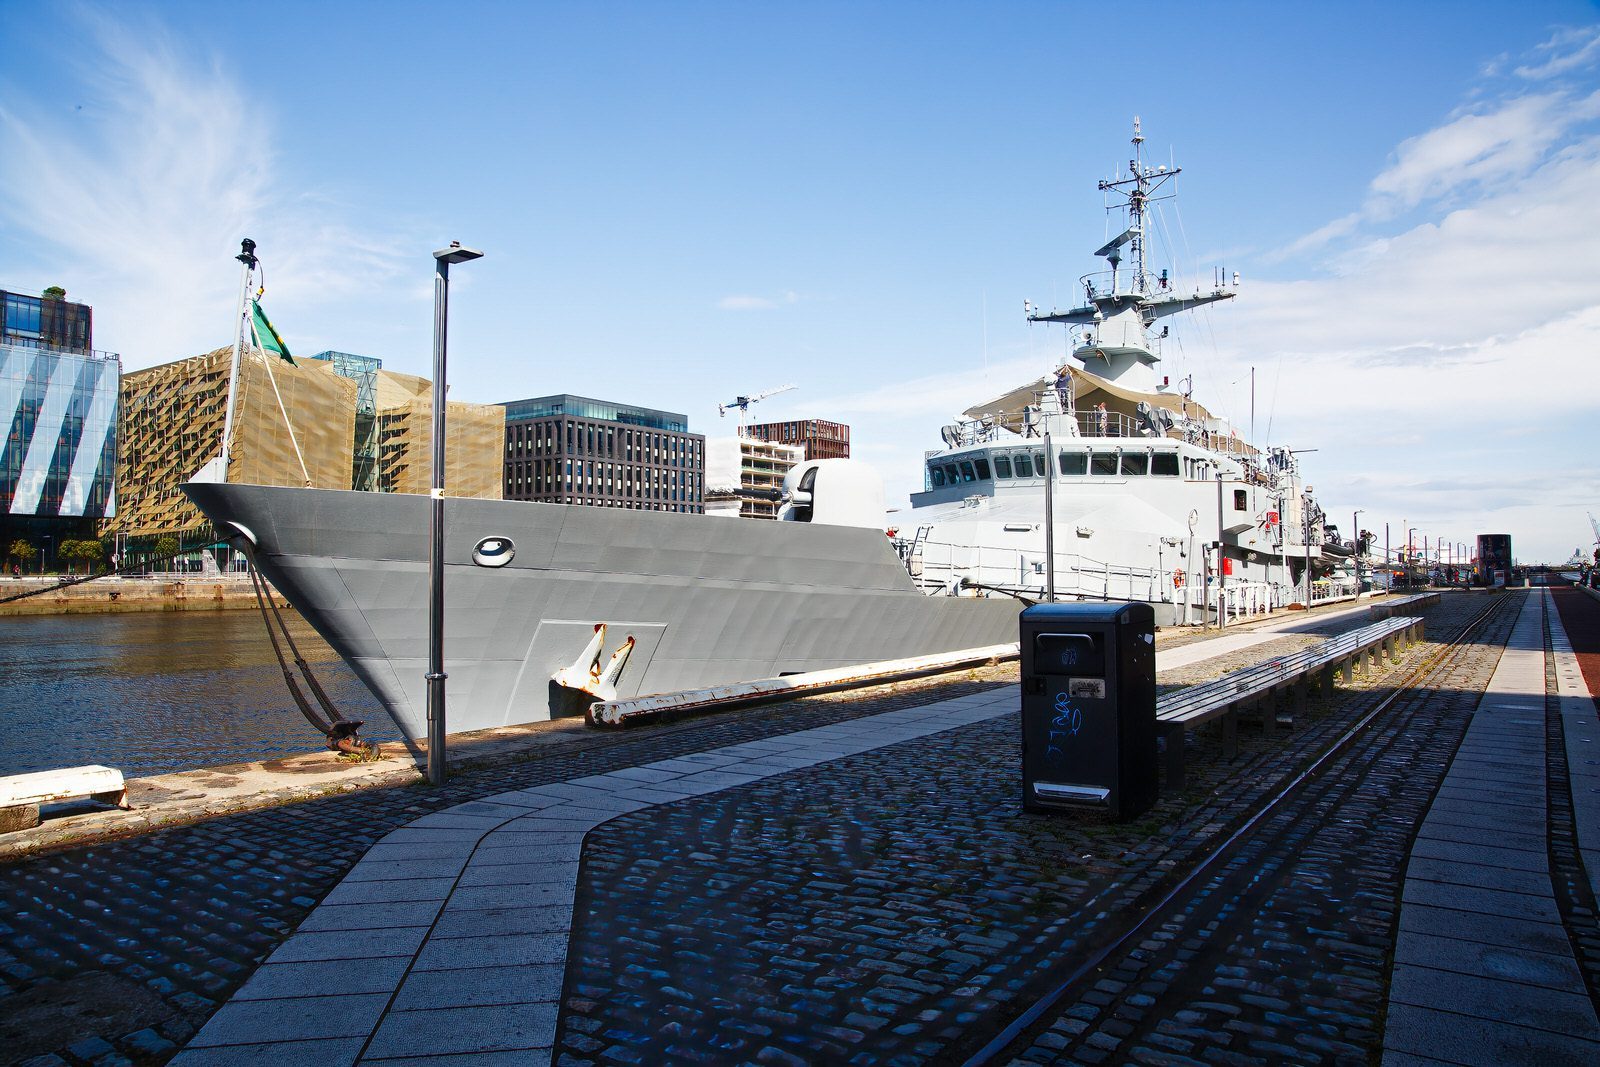 THE P61 IS AN IRISH NAVY VESSEL [I WAS HOPING TO PHOTOGRAPH THE USS MESA VERDE] 008